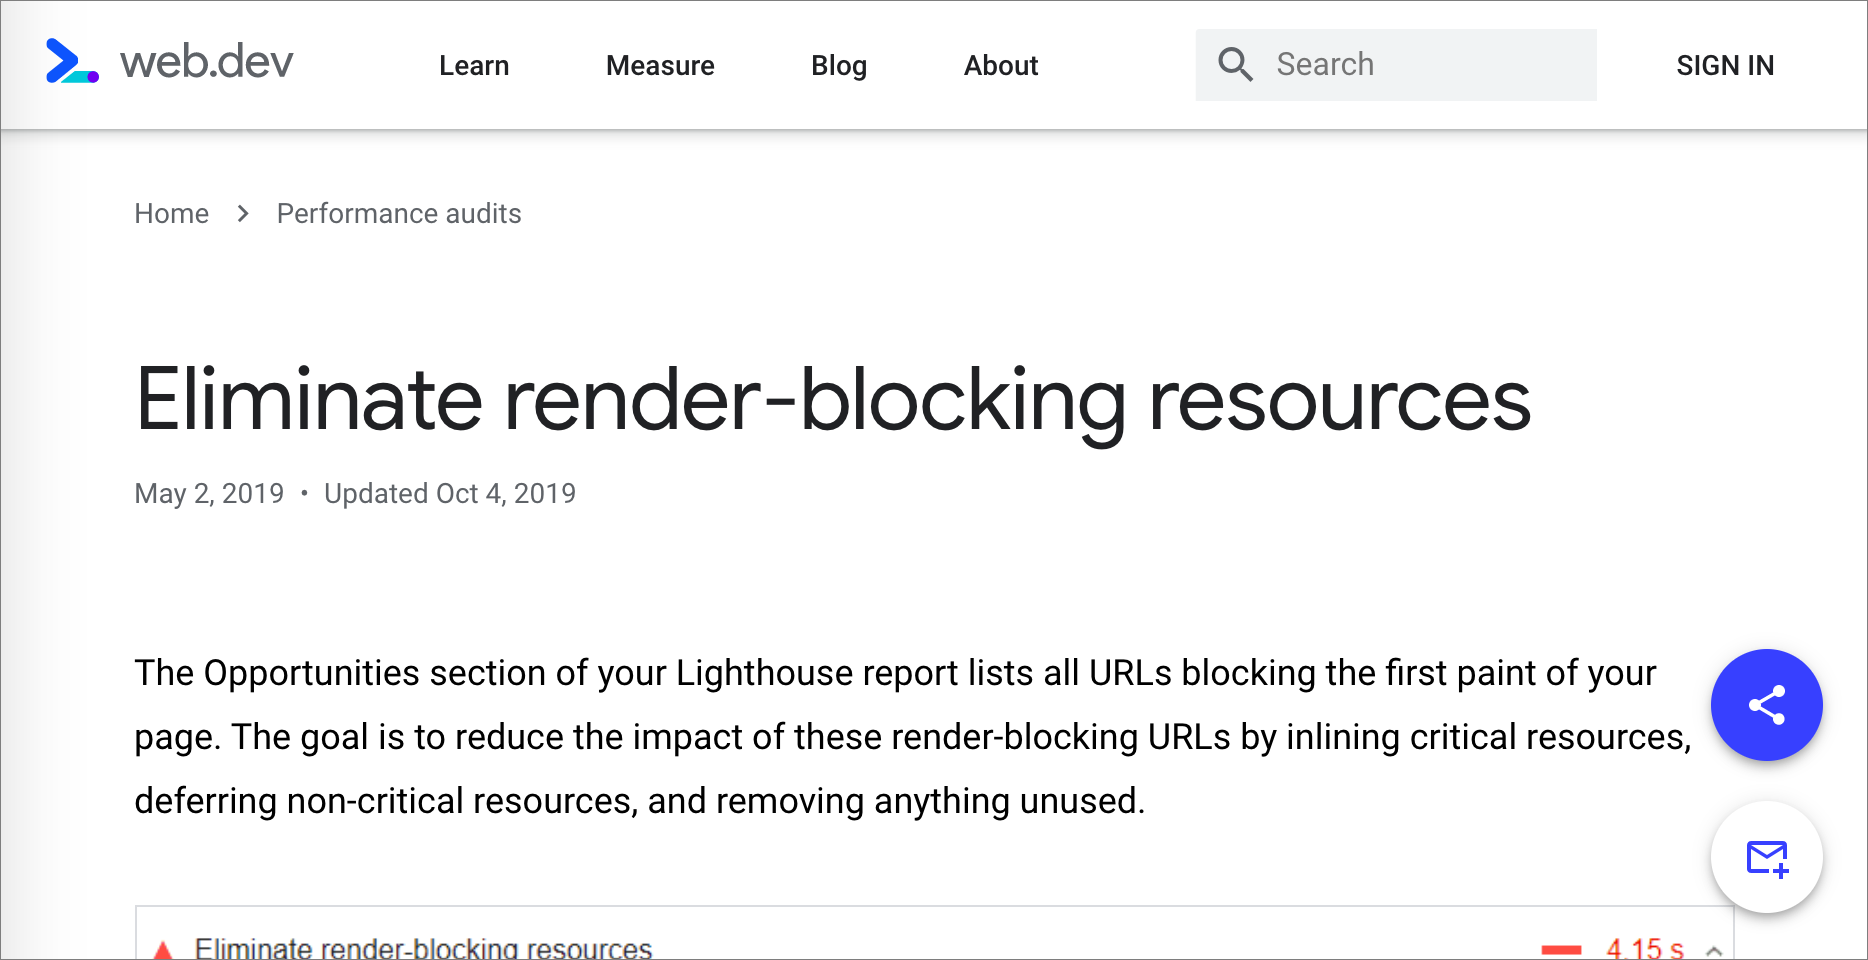 Documentation for the Eliminate render-blocking resources opportunity